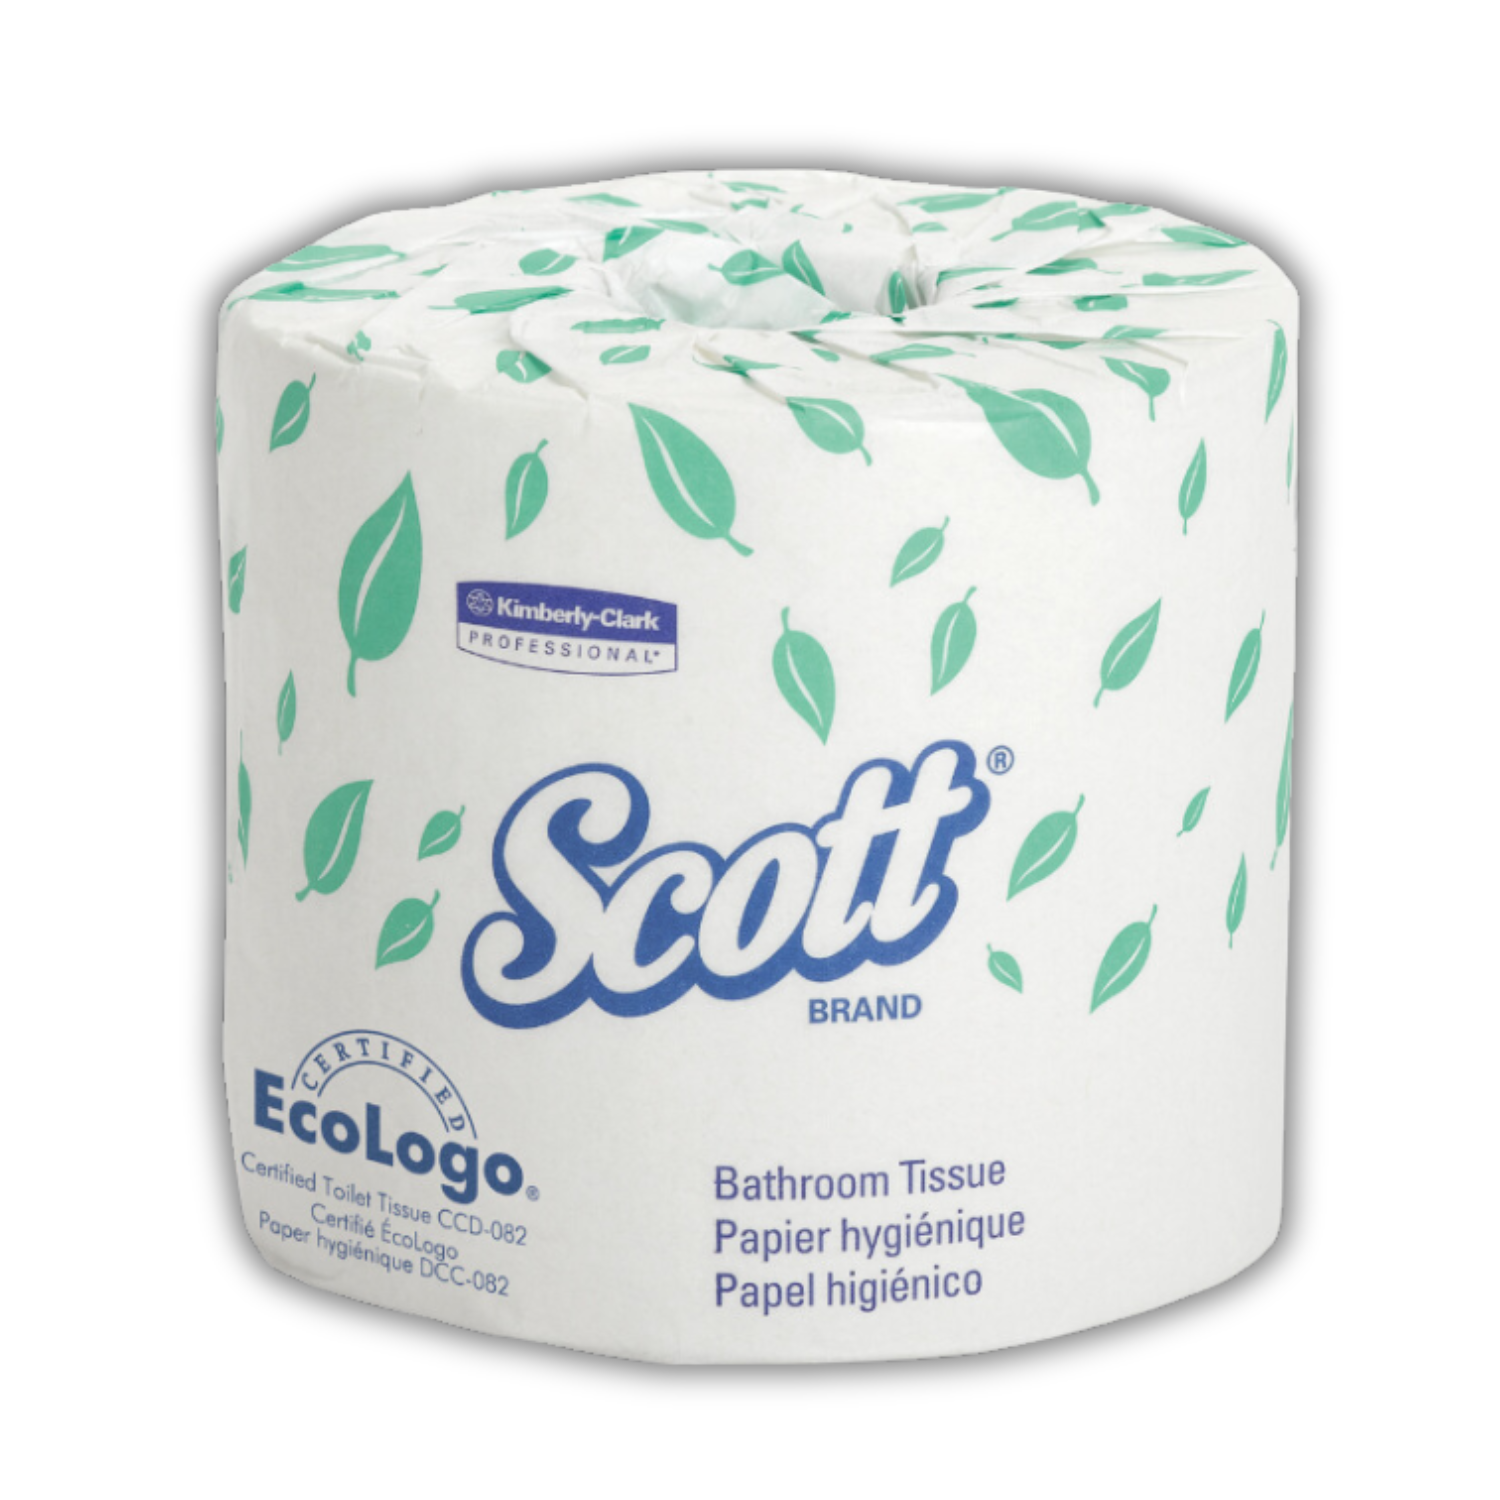 single roll of toilet paper wrapped in "scott" brand paper